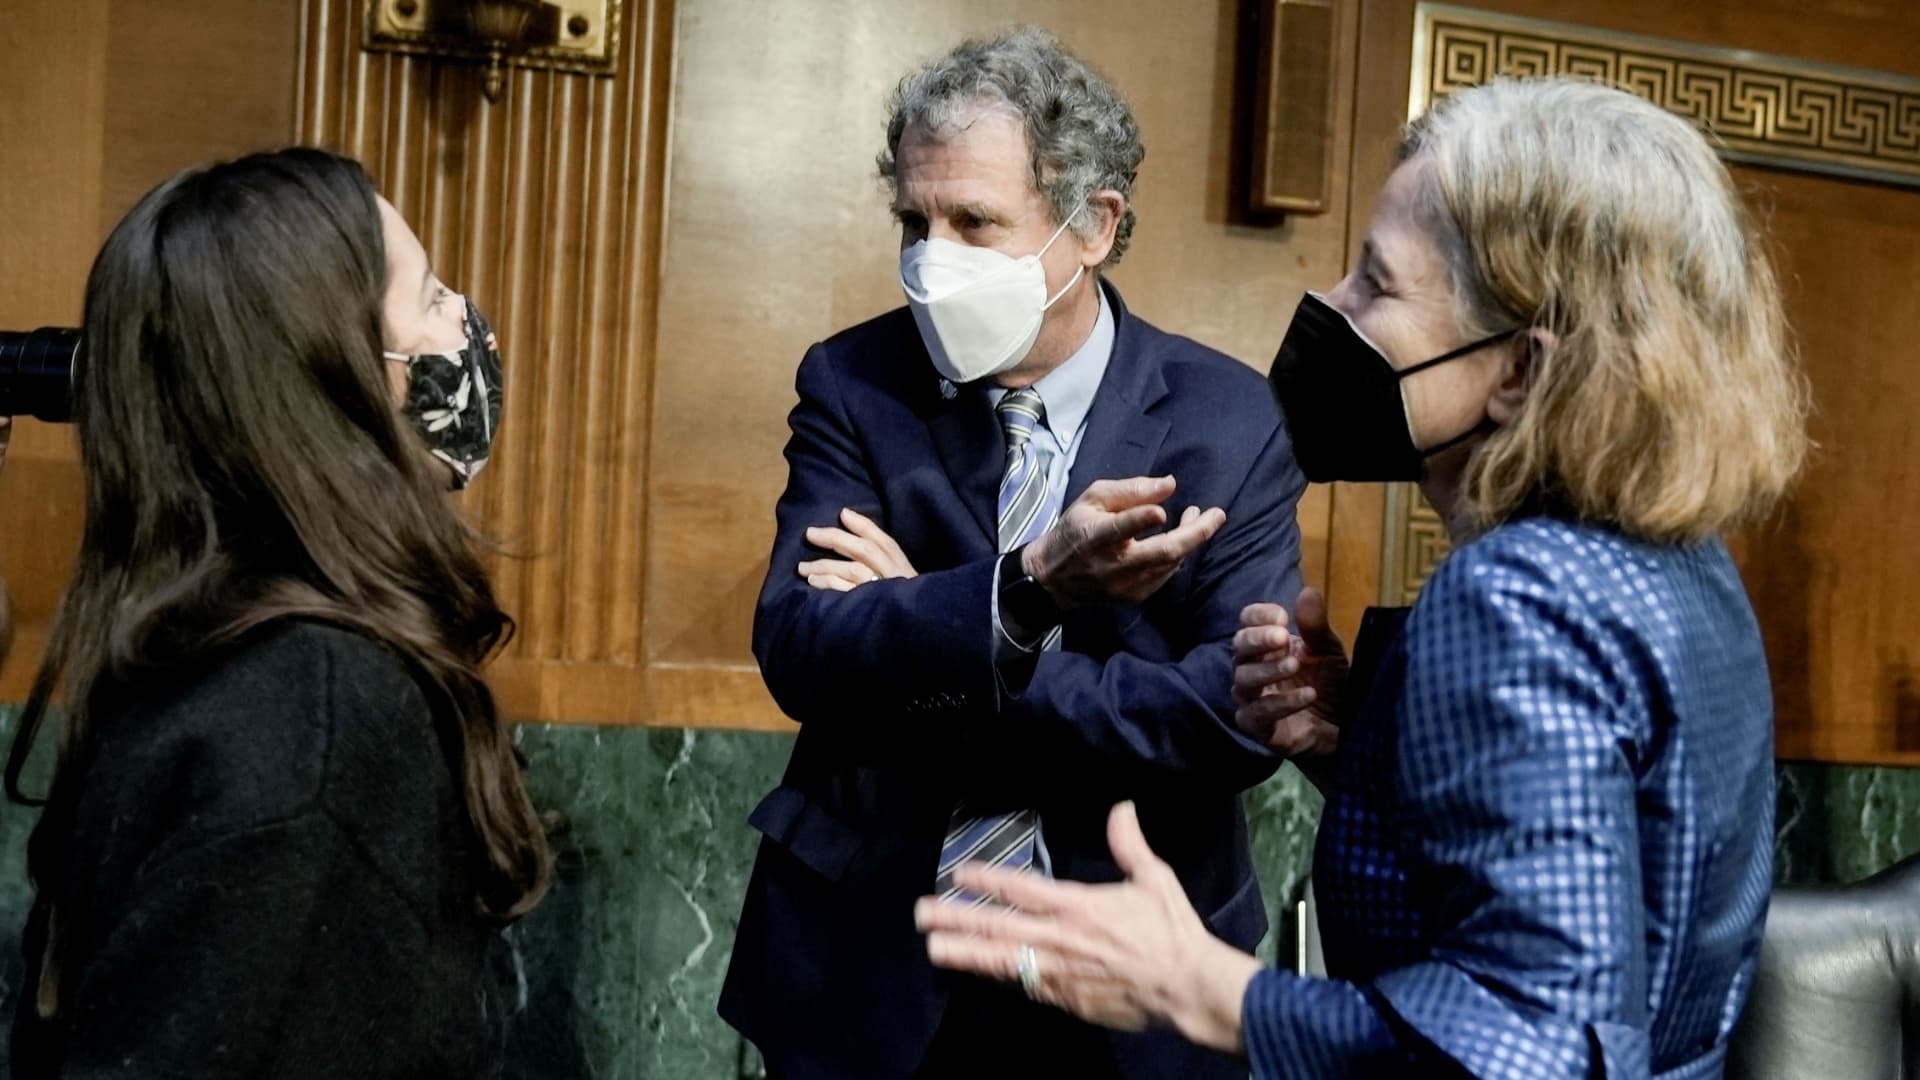 U.S. Senator Sherrod Brown (D-OH) chats with Sarah Bloom Raskin, who is nominated to be vice chairman for supervision and a member of the Federal Reserve Board of Governors, and her daughter Hannah Raskin, following a Senate Banking, Housing and Urban Affairs Committee confirmation hearing on Capitol Hill in Washington, D.C., U.S., February 3, 2022.